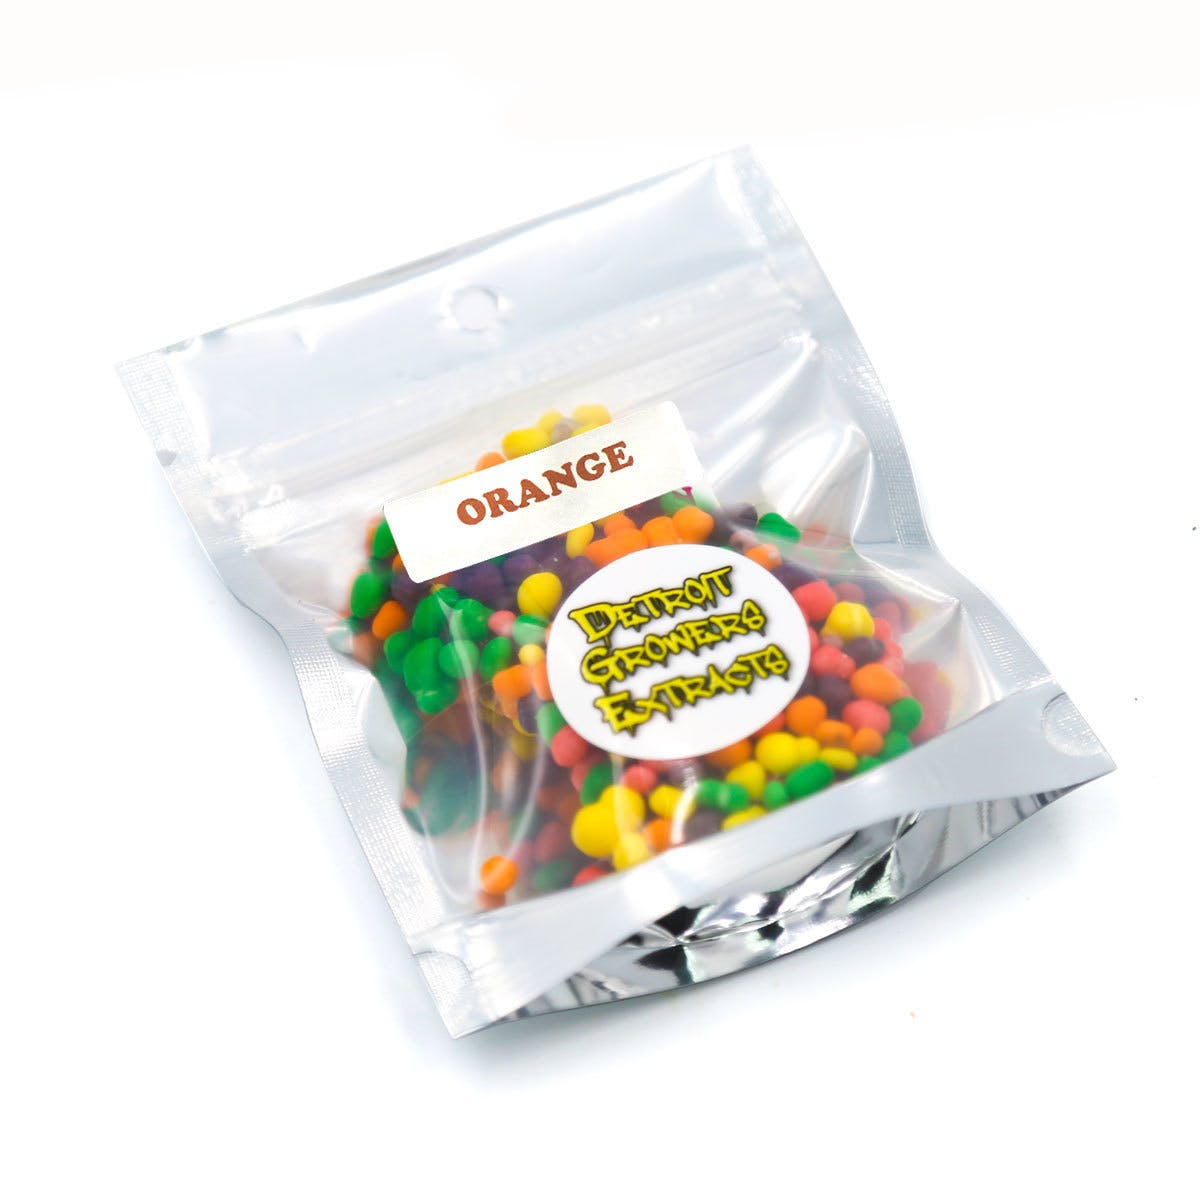 edible-detroit-growers-extracts-orange-nerds-rope-100mg